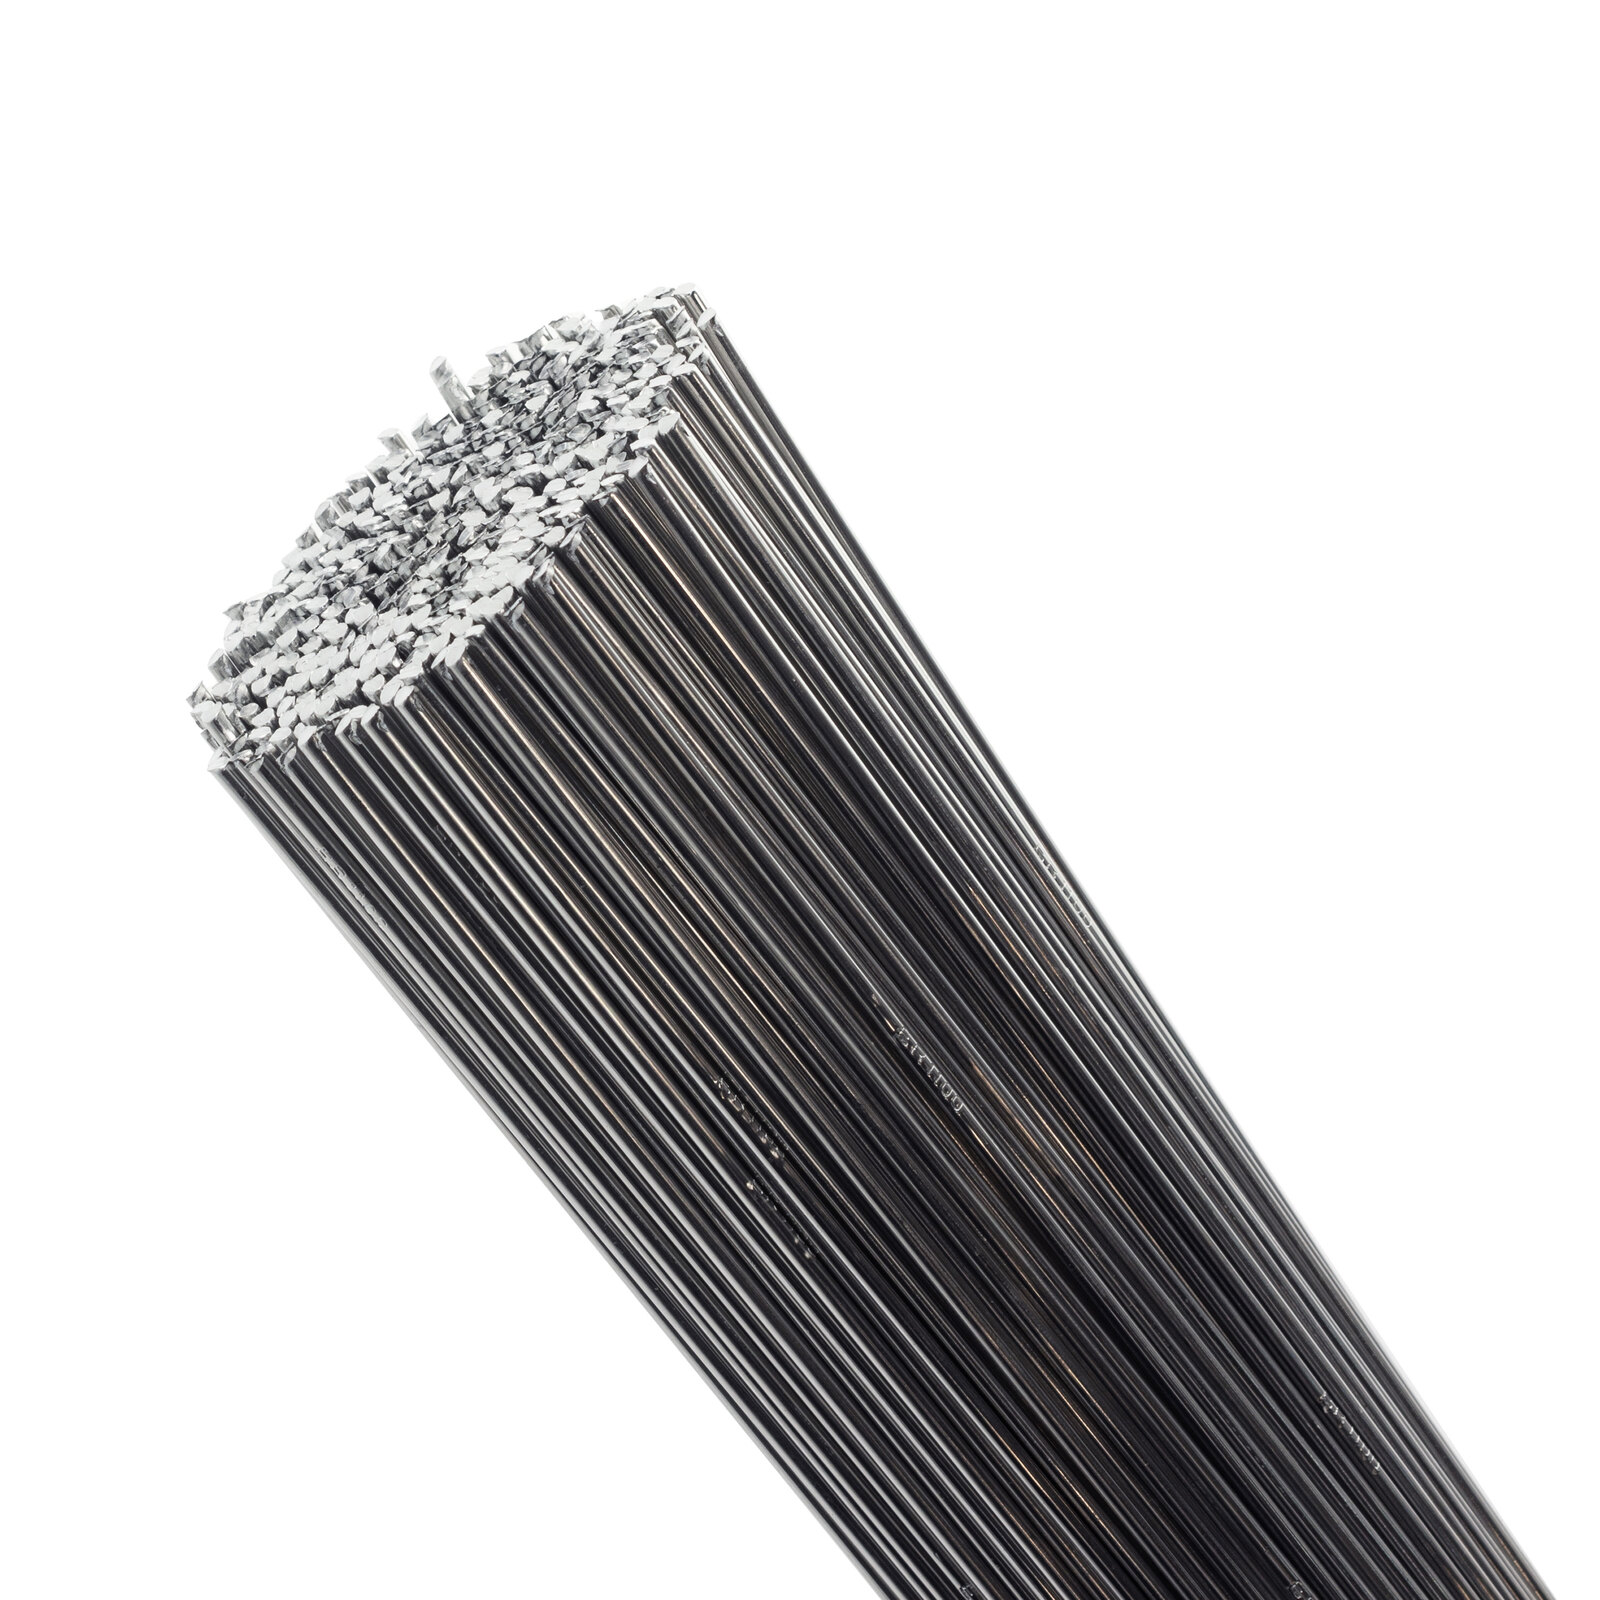 China ER1100 A5.10 Aluminum Weding Wire Mig Rods and Electrodes